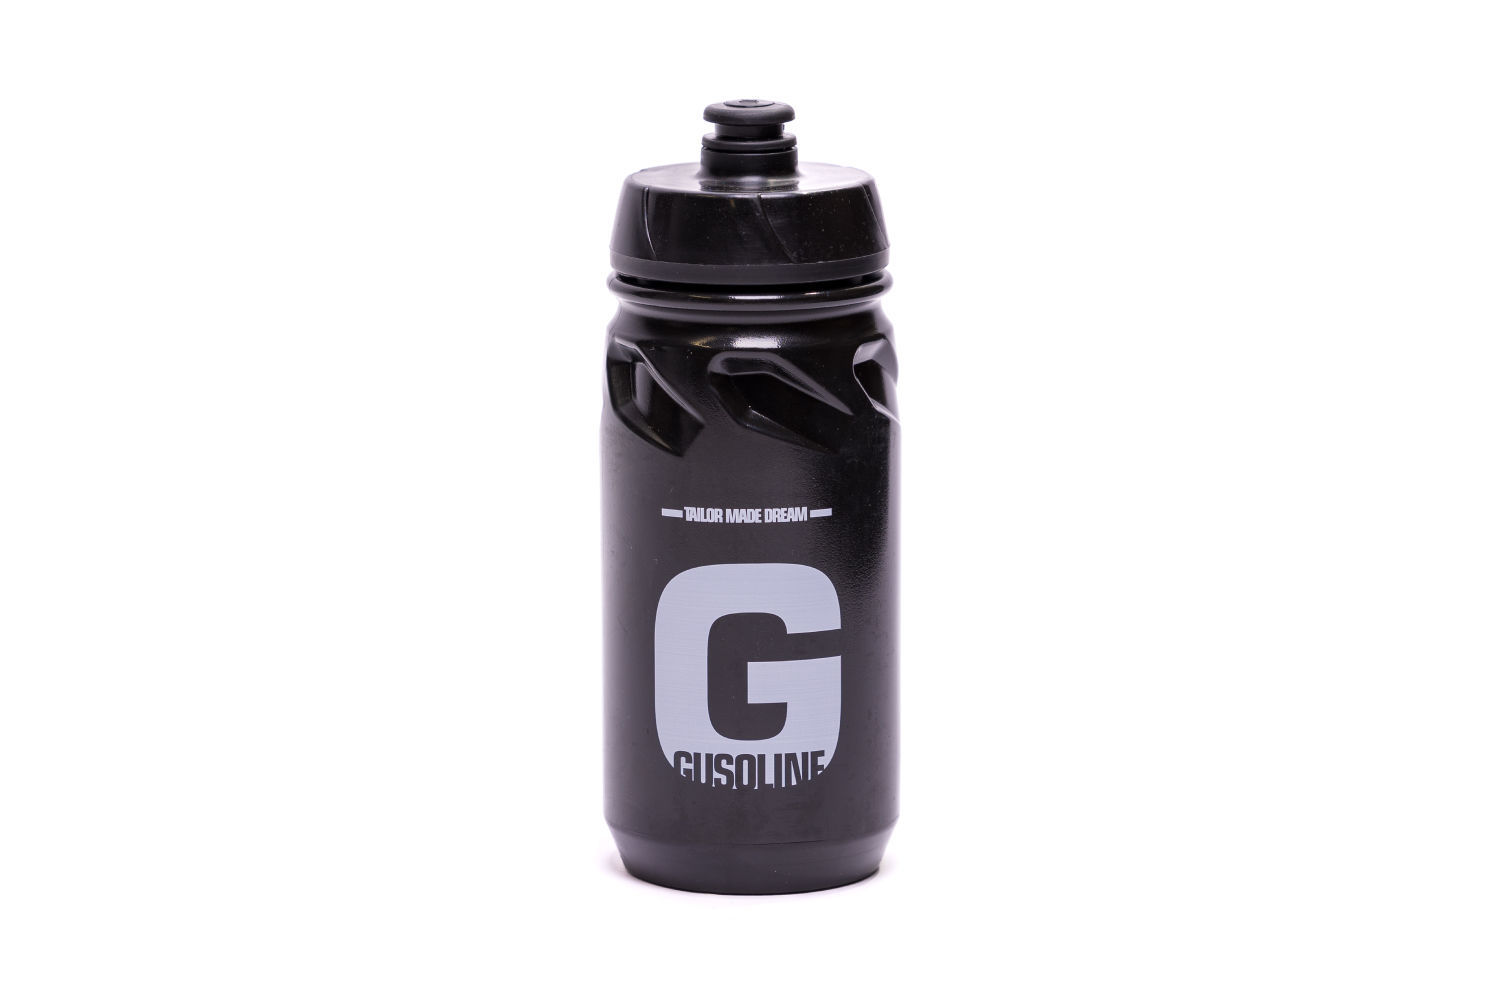 Picture of Gusoline Small Black Water Bottle Tailor Made Dream